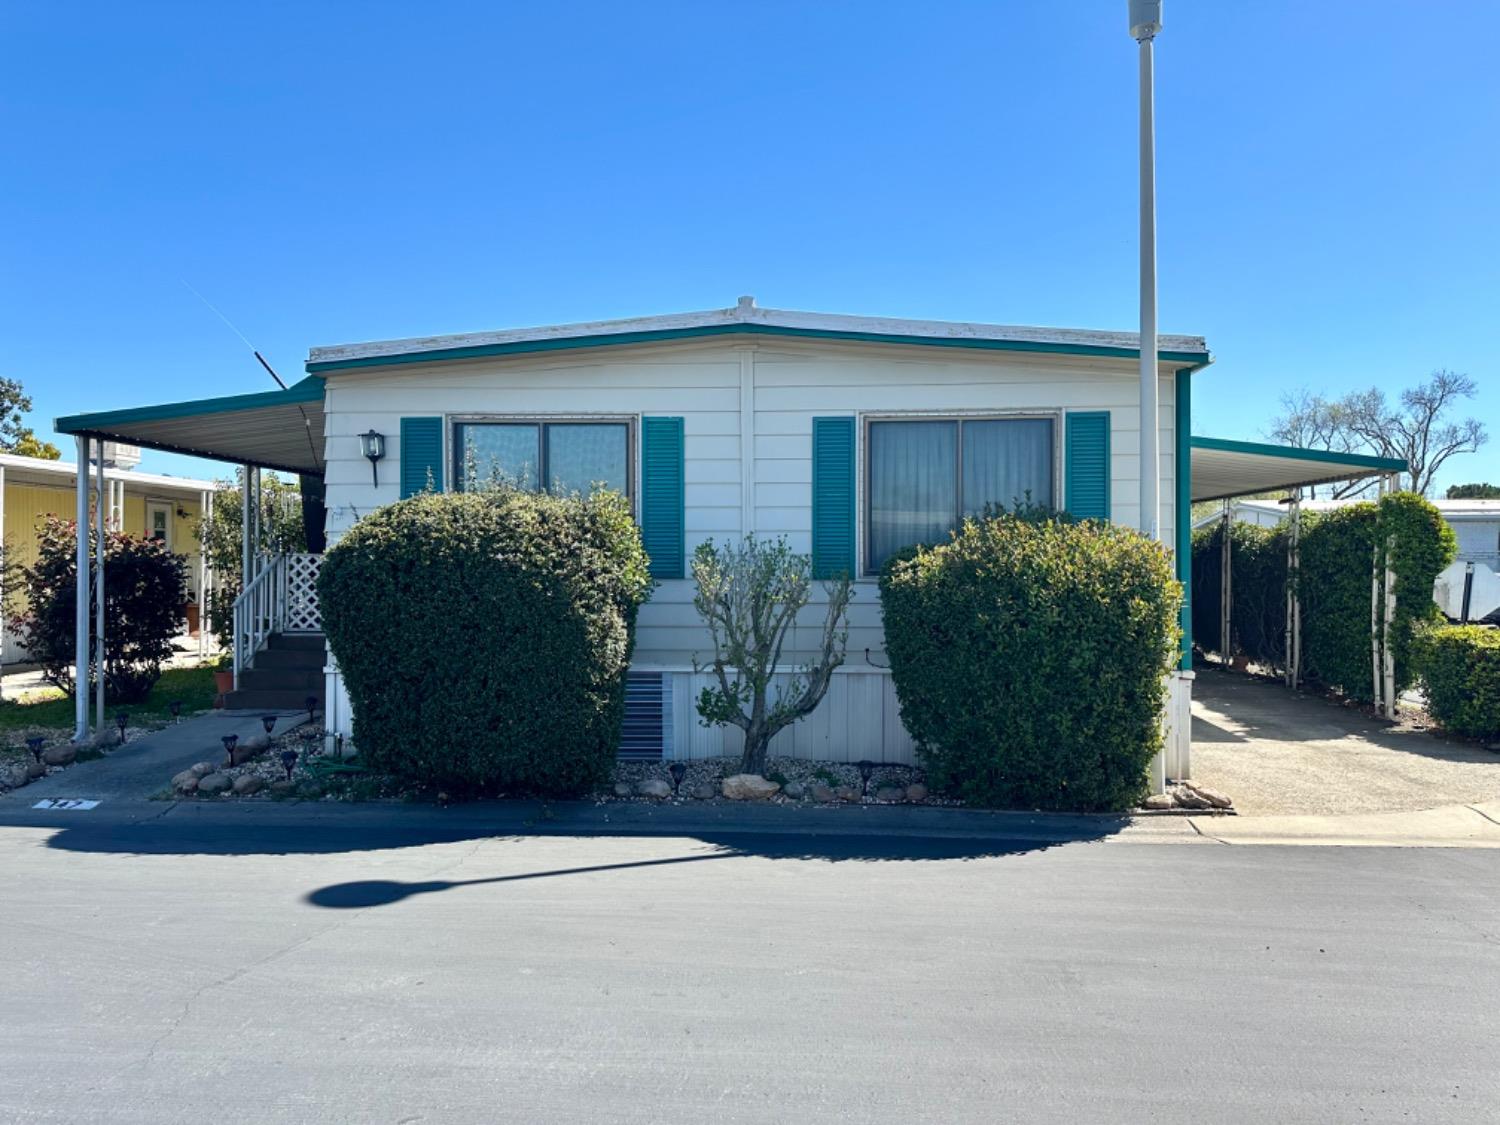 Photo of 5040 Jackson St #147 in North Highlands, CA